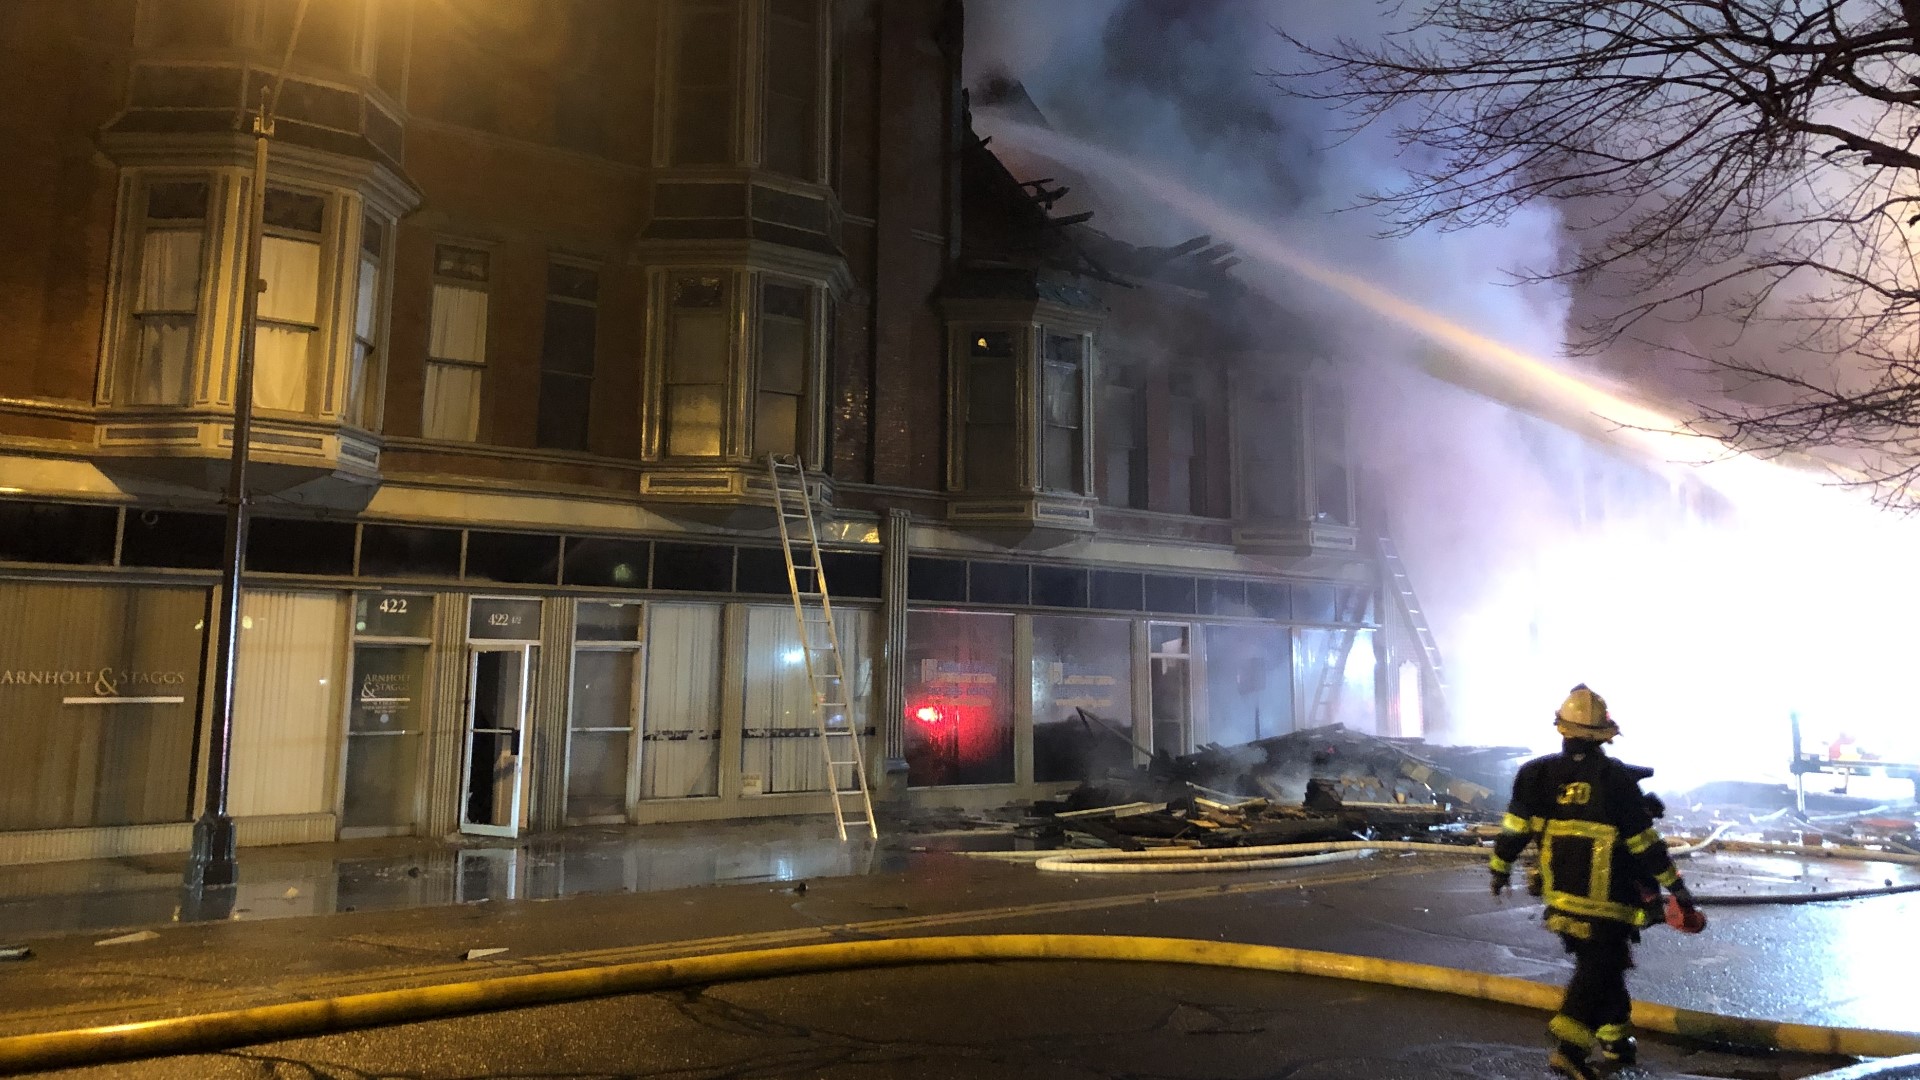 Firefighters needed four hours in freezing conditions to extinguish a commercial building fire in downtown Columbus.